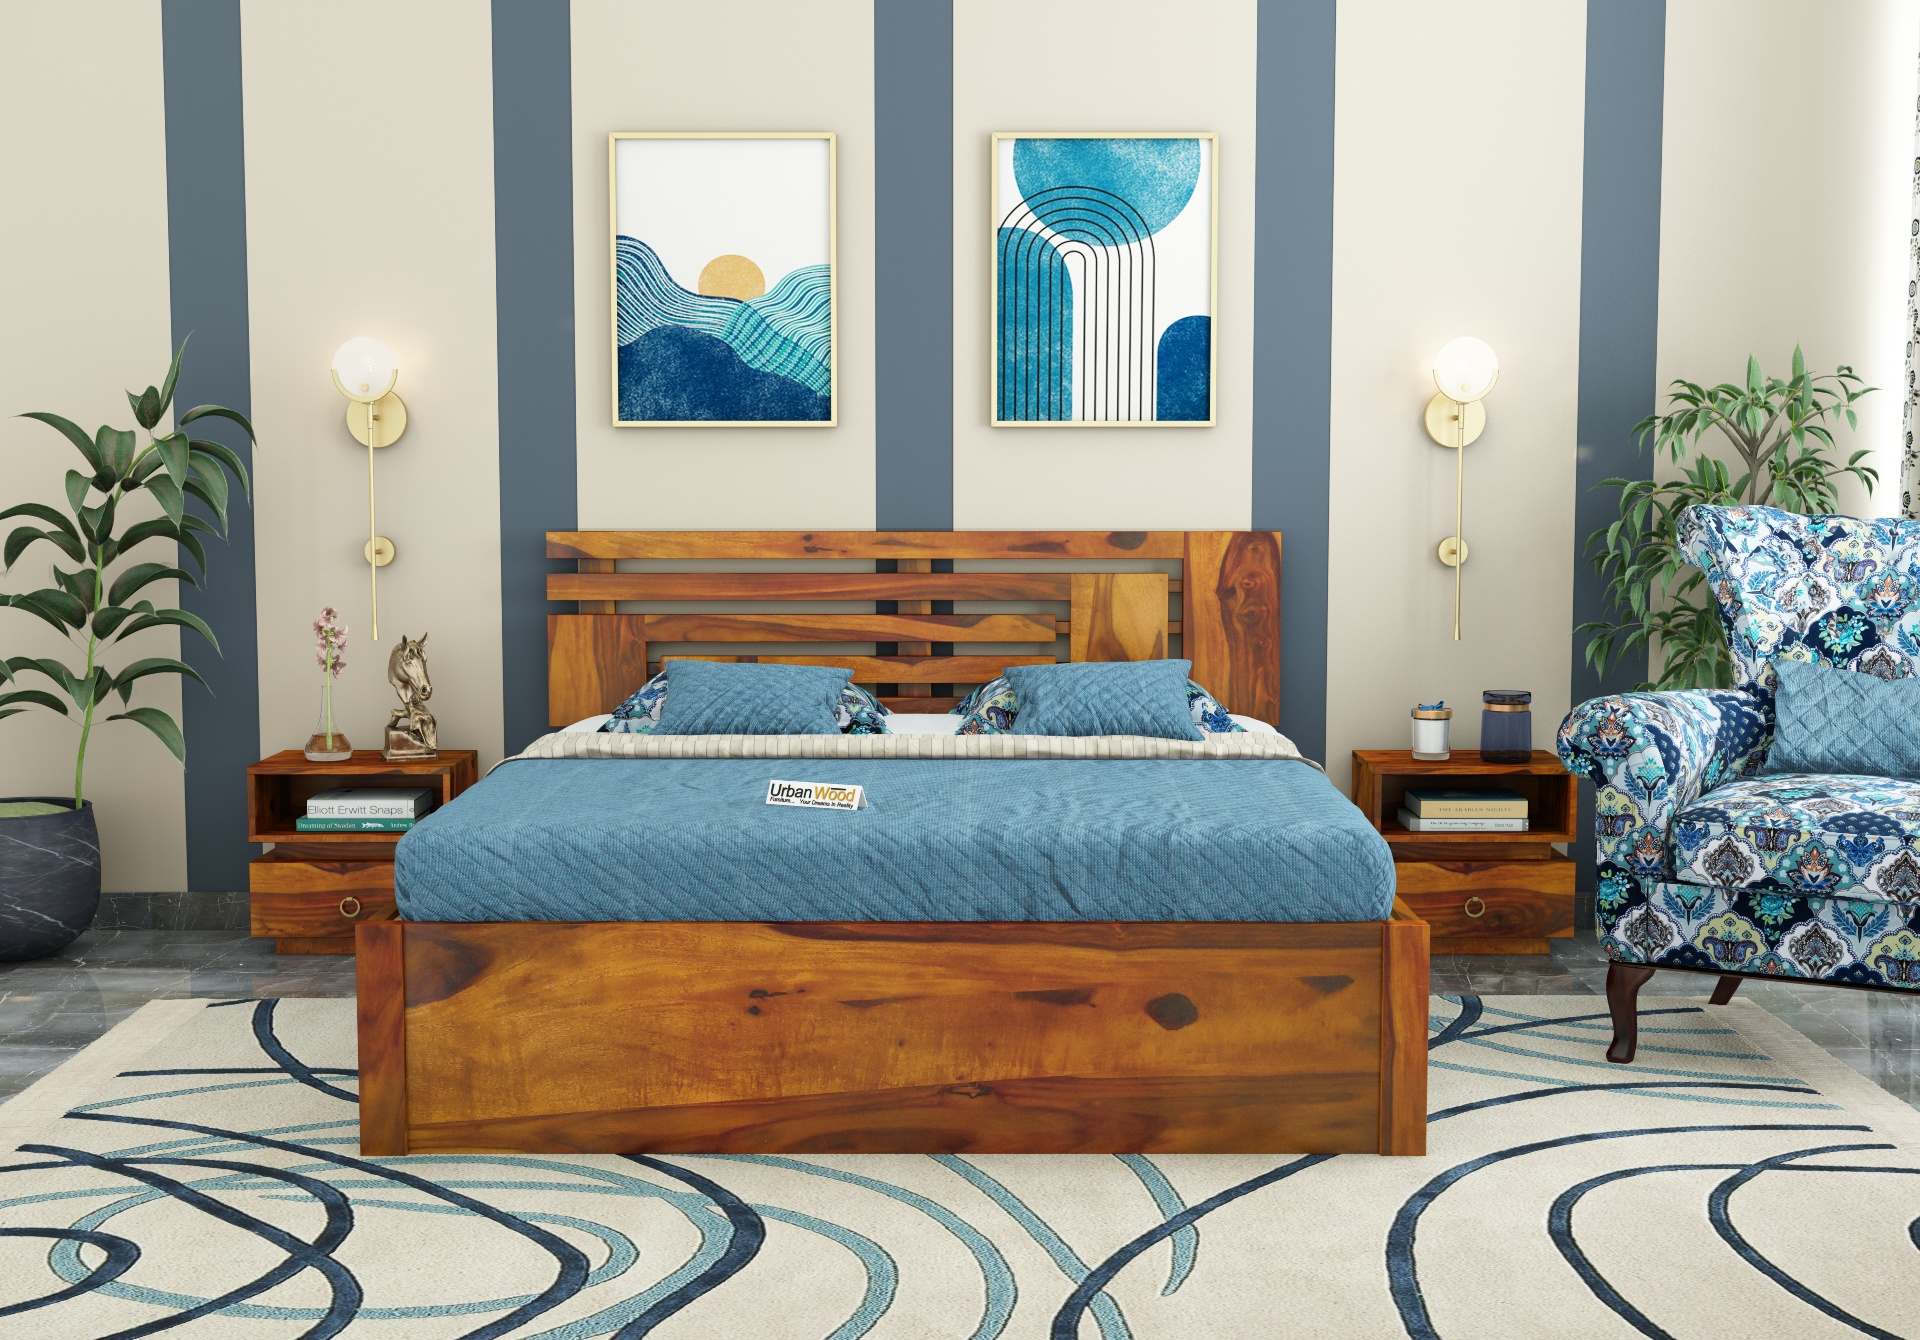 Berlin Wooden Hydraulic Bed  (King Size, Honey Finish)